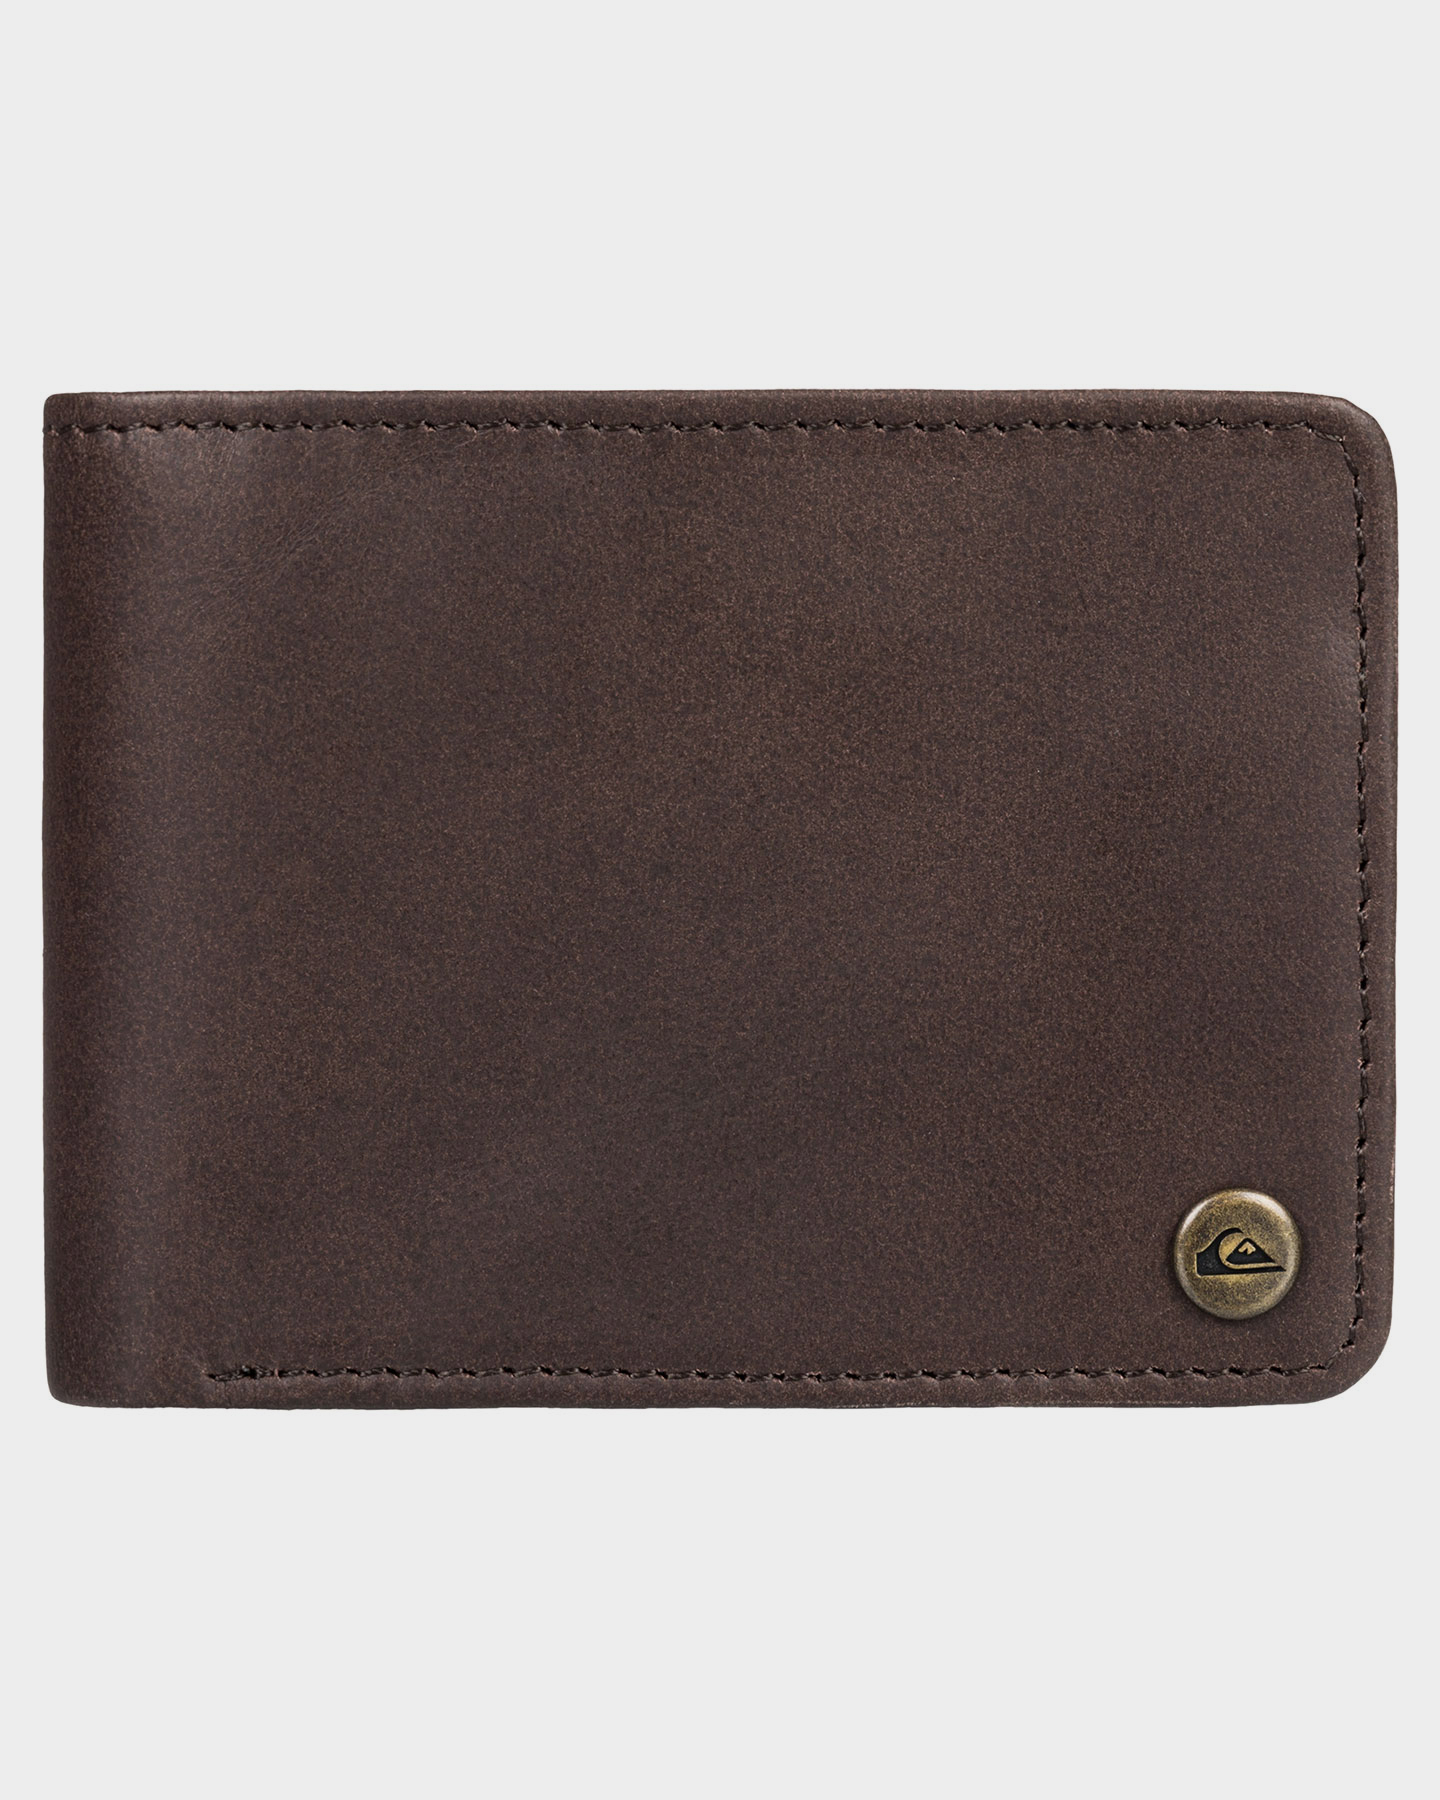 Quiksilver Mens Mack Leather Bi Fold Wallet - Chocolate Brown | SurfStitch